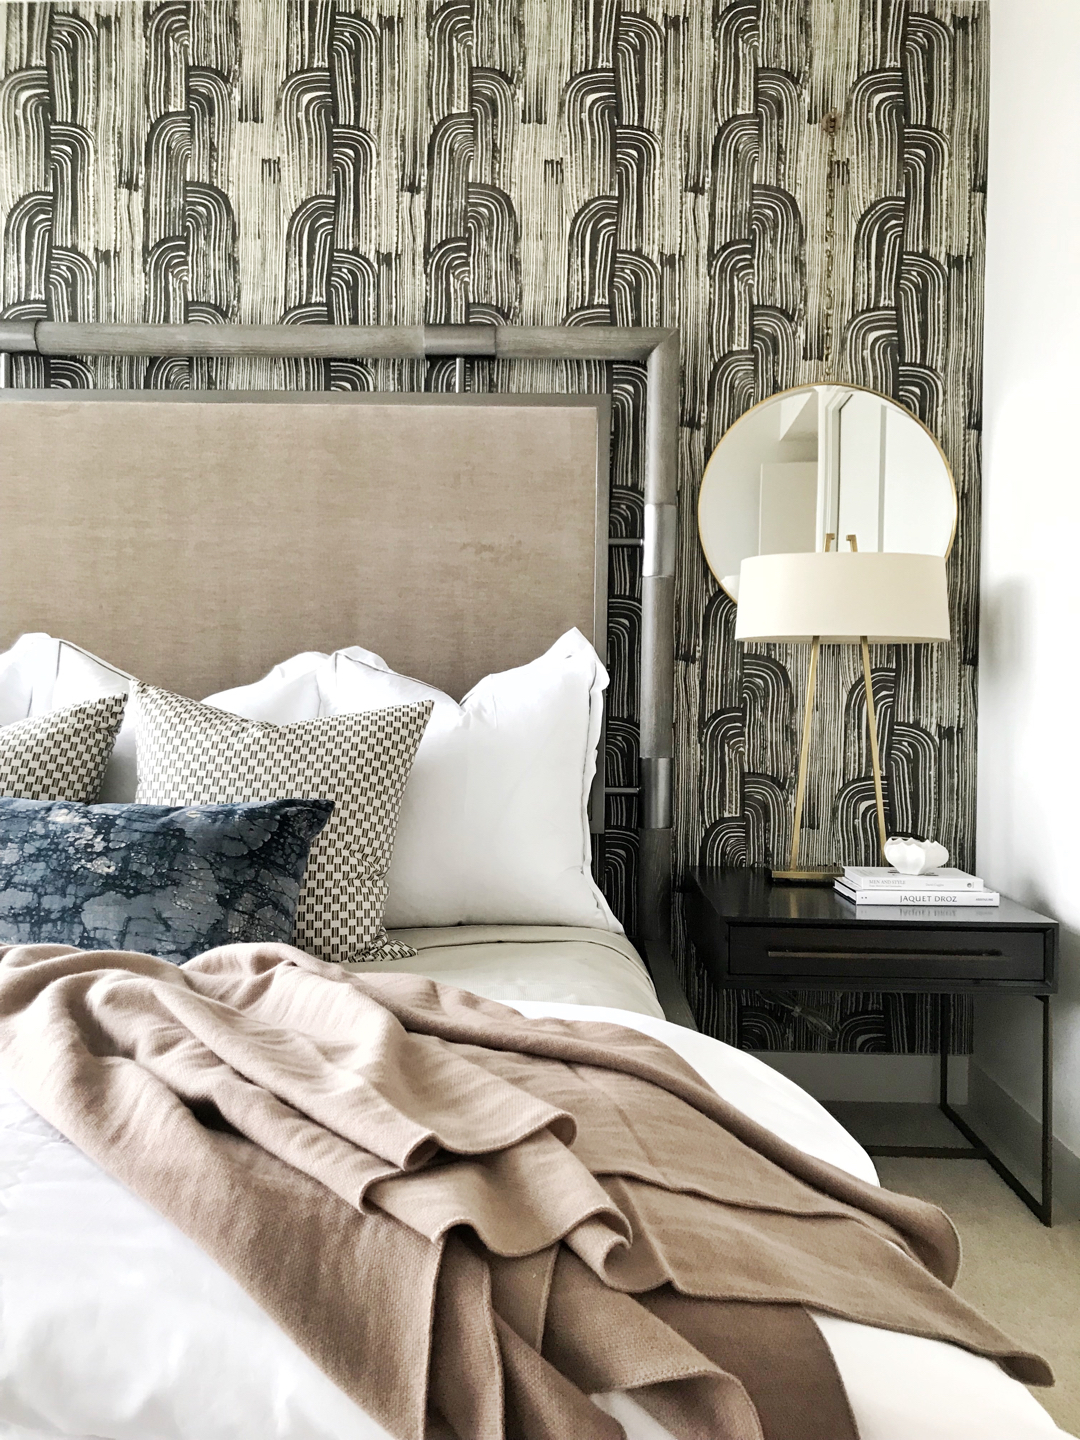 Pulp Design Studios Interior Design Install, High-Rise Condo Transformation, Kelly Wearstler Wallcovering, Lee Jofa Wallcovering, Master Bedroom Decor, Hotel-like Bedroom Design, How to Style a Bed, Nightstand, Handsome Interior Design, Groundworks Wallcovering, Wallpaper